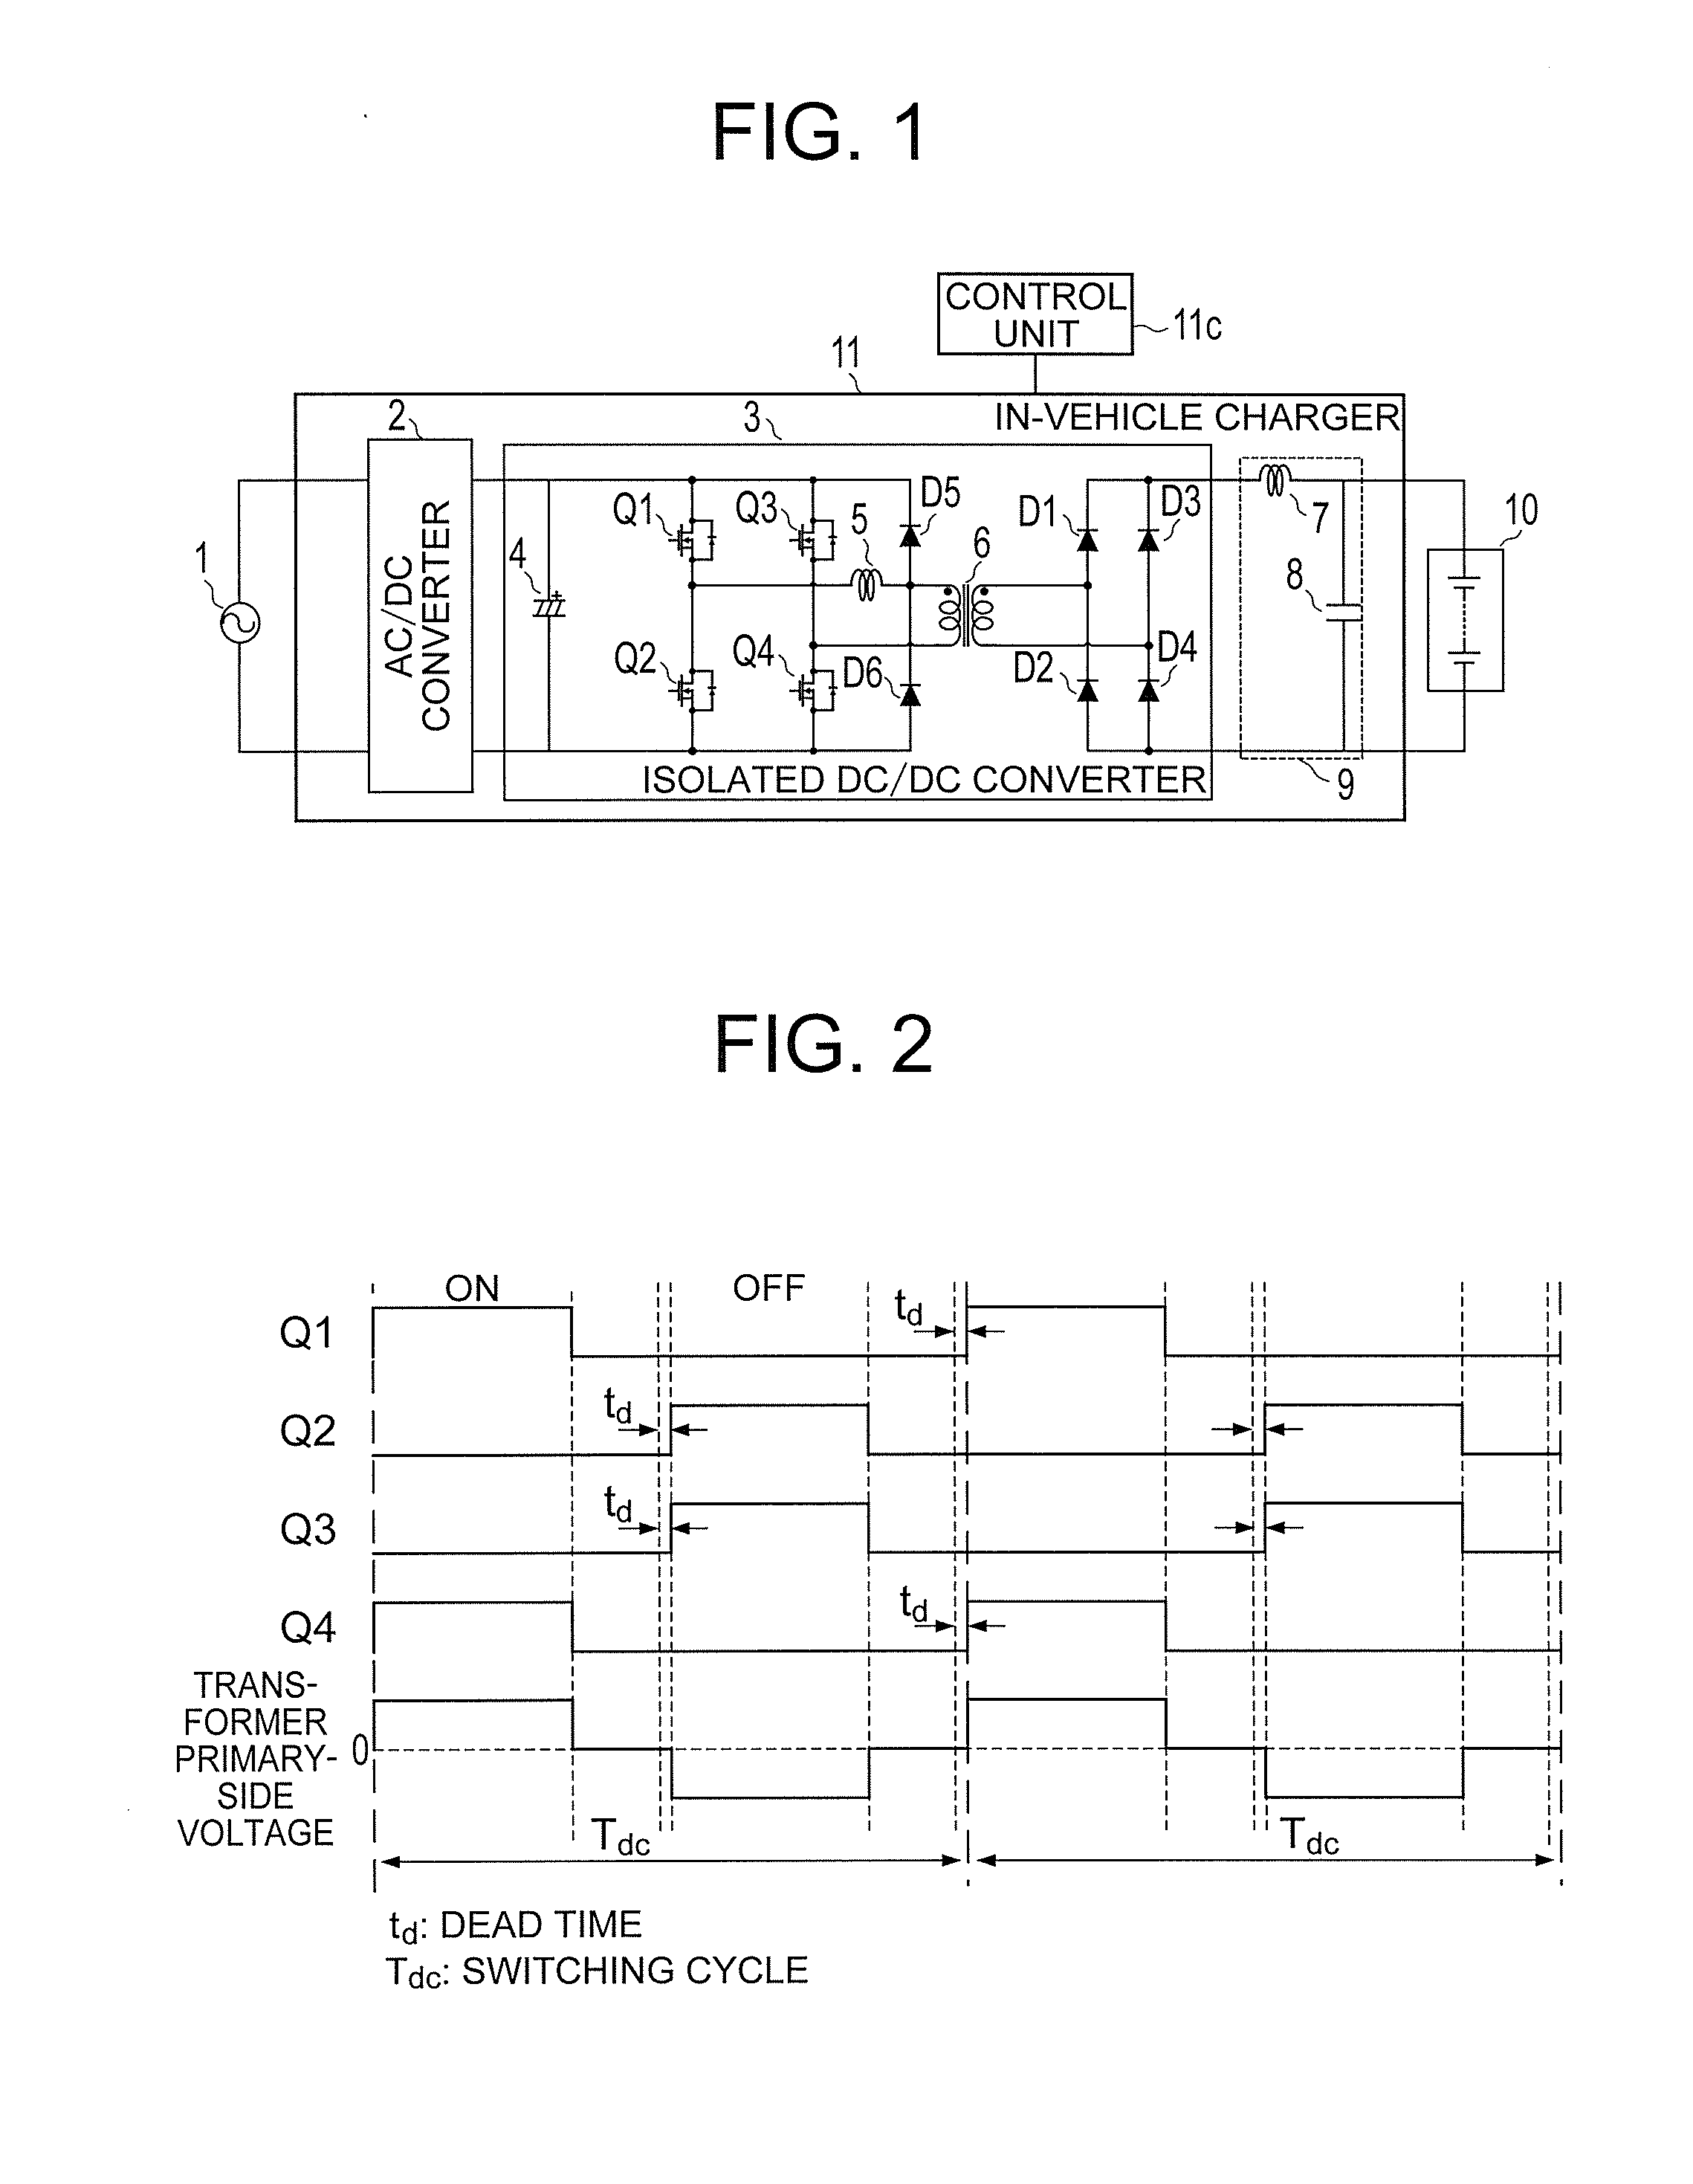 In-vehicle charger and surge-suppression method in in-vehicle charger